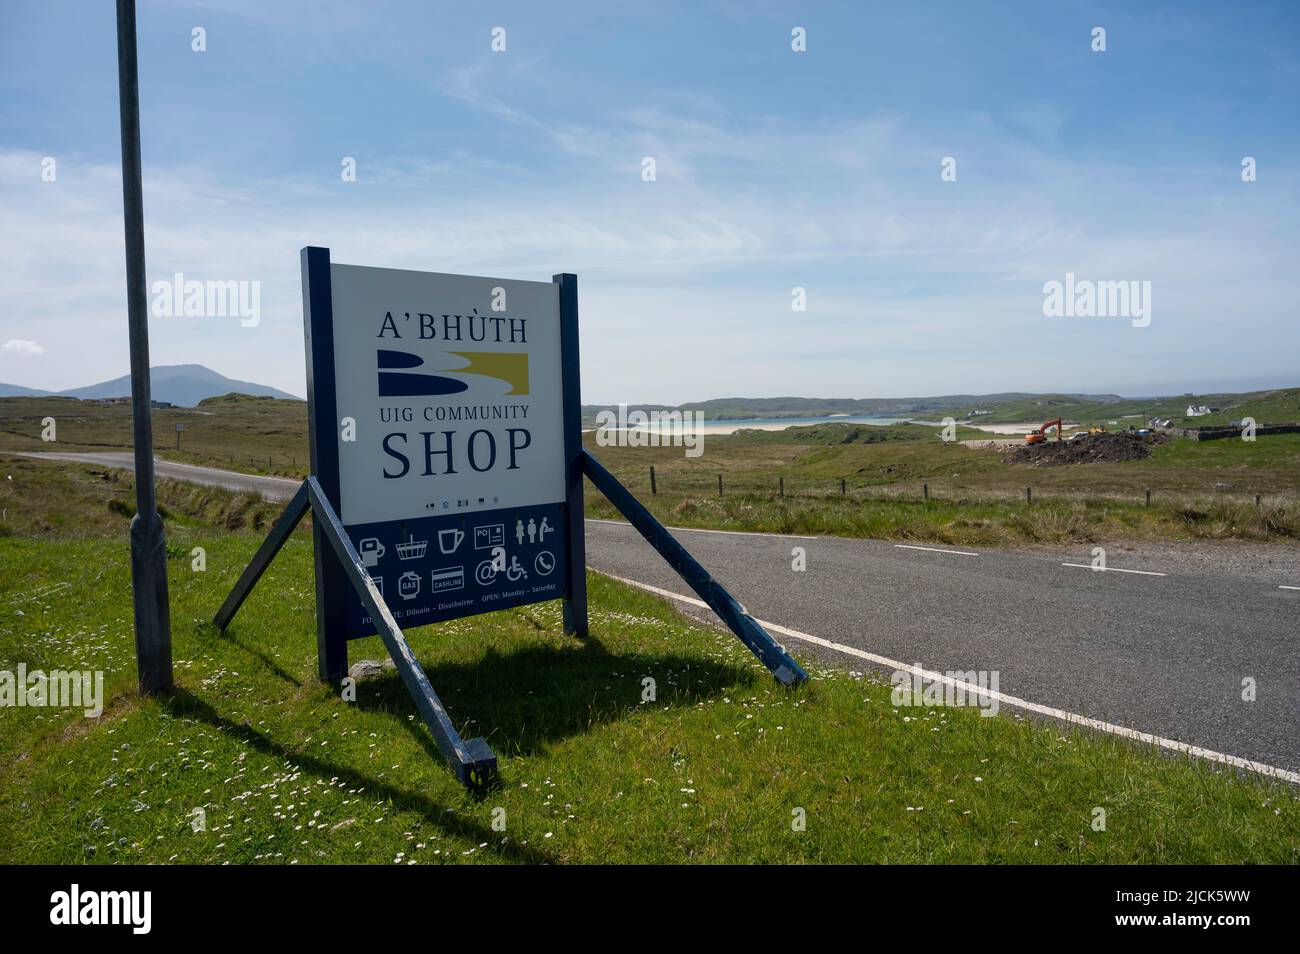 Sign for Uig community shop on Isle of Lewis with icons for fuel, shopping, refreshments etc. Road, fields, beach and sea in background. Sunny day Stock Photo